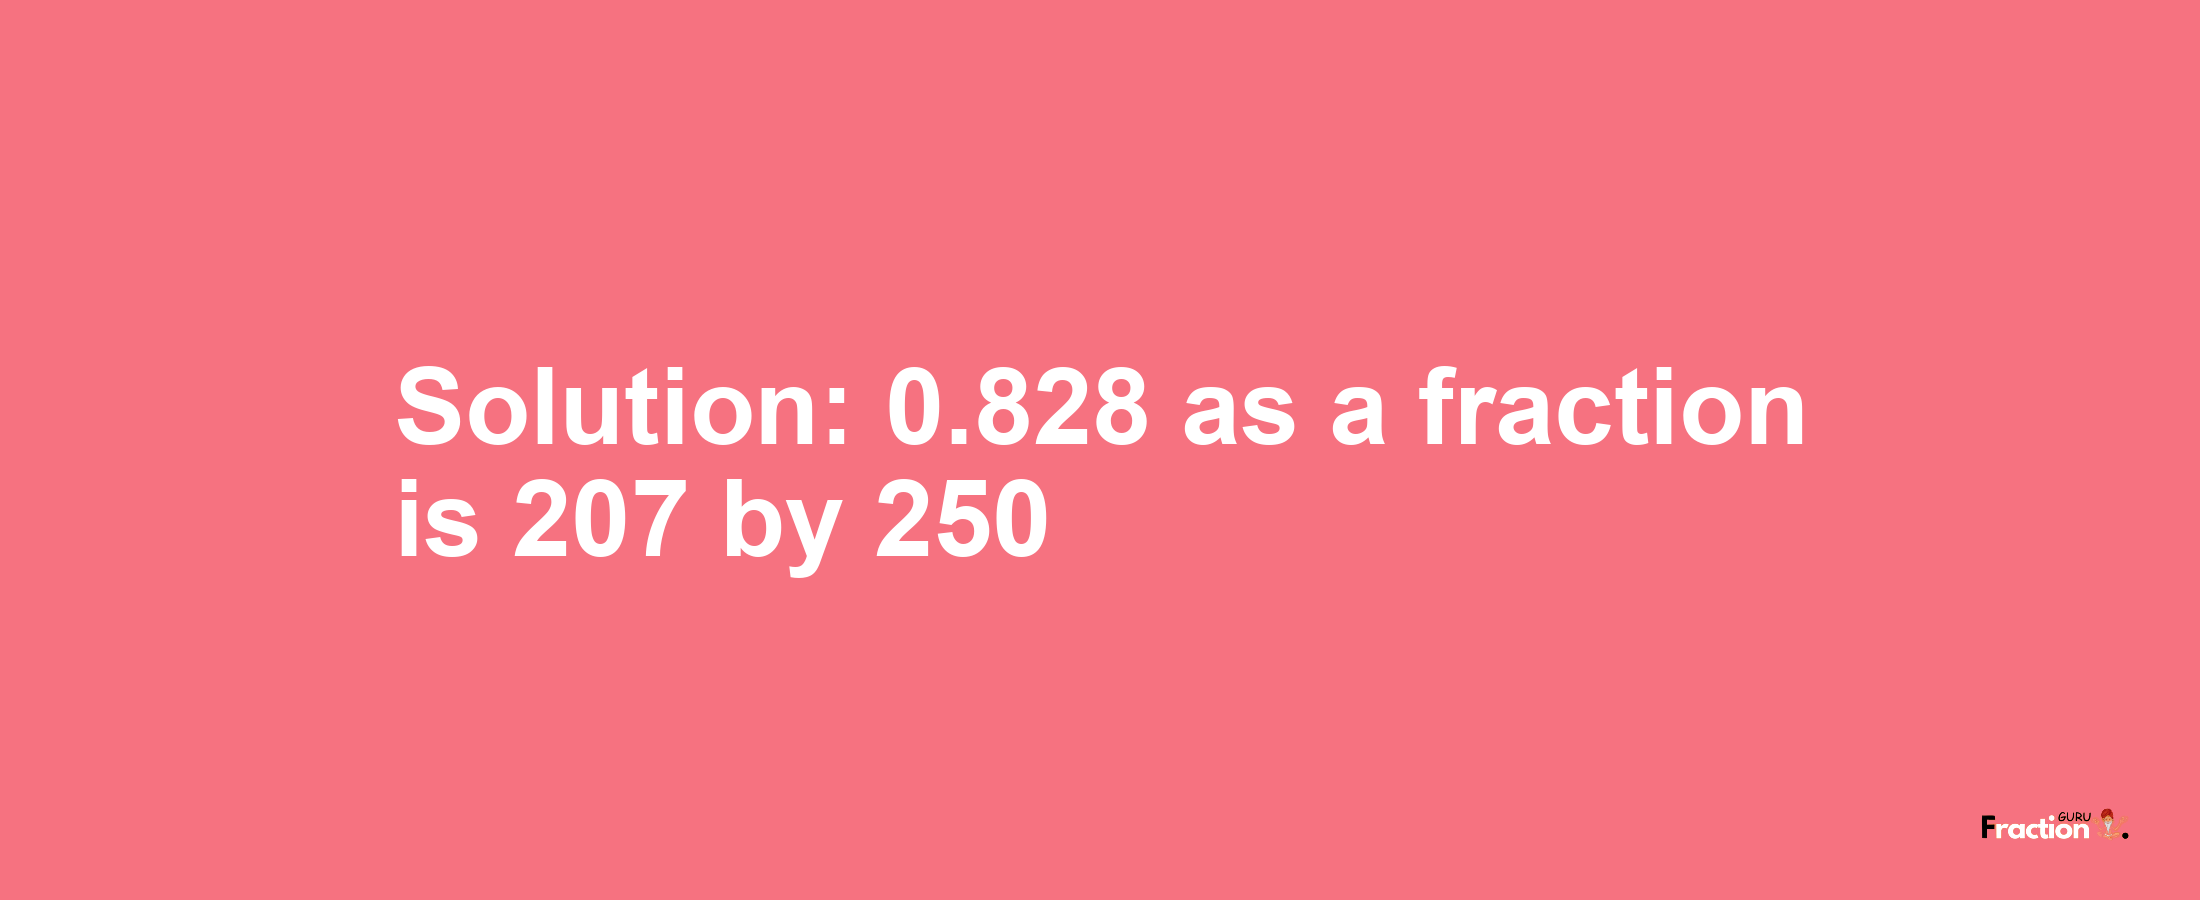 Solution:0.828 as a fraction is 207/250